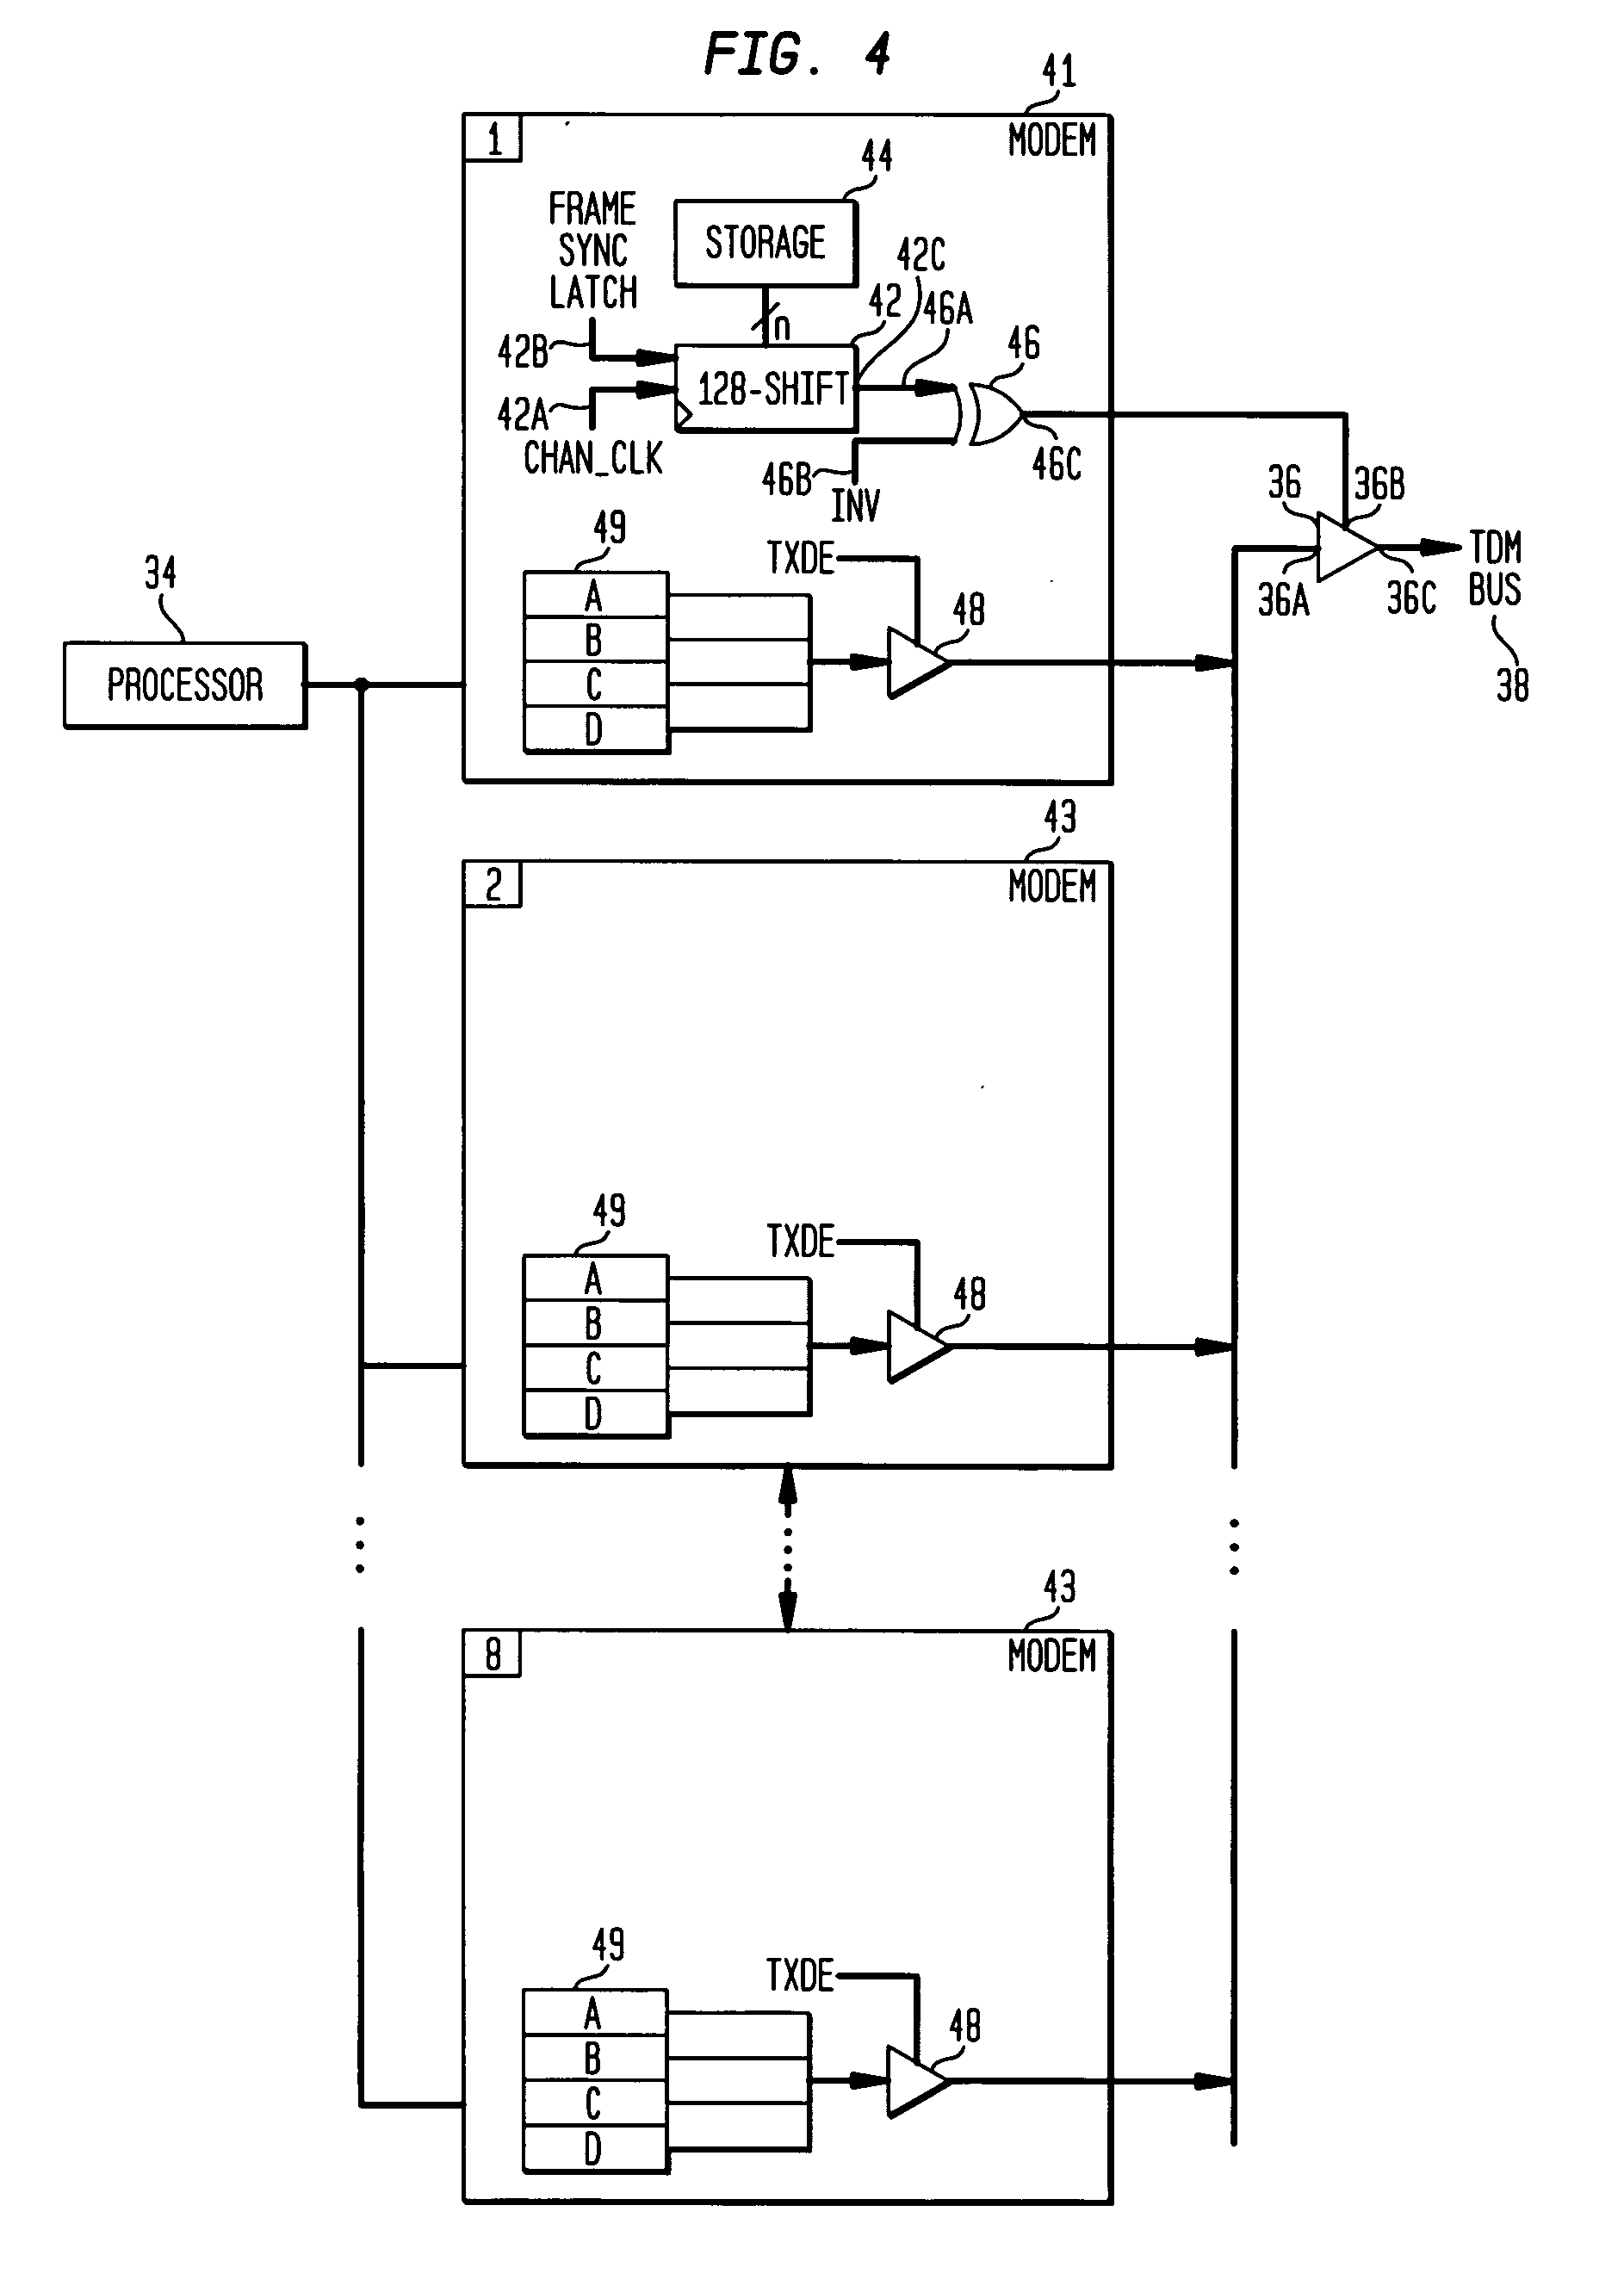 Method and apparatus for interfacing multiple communication devices to a time division multiplexing bus